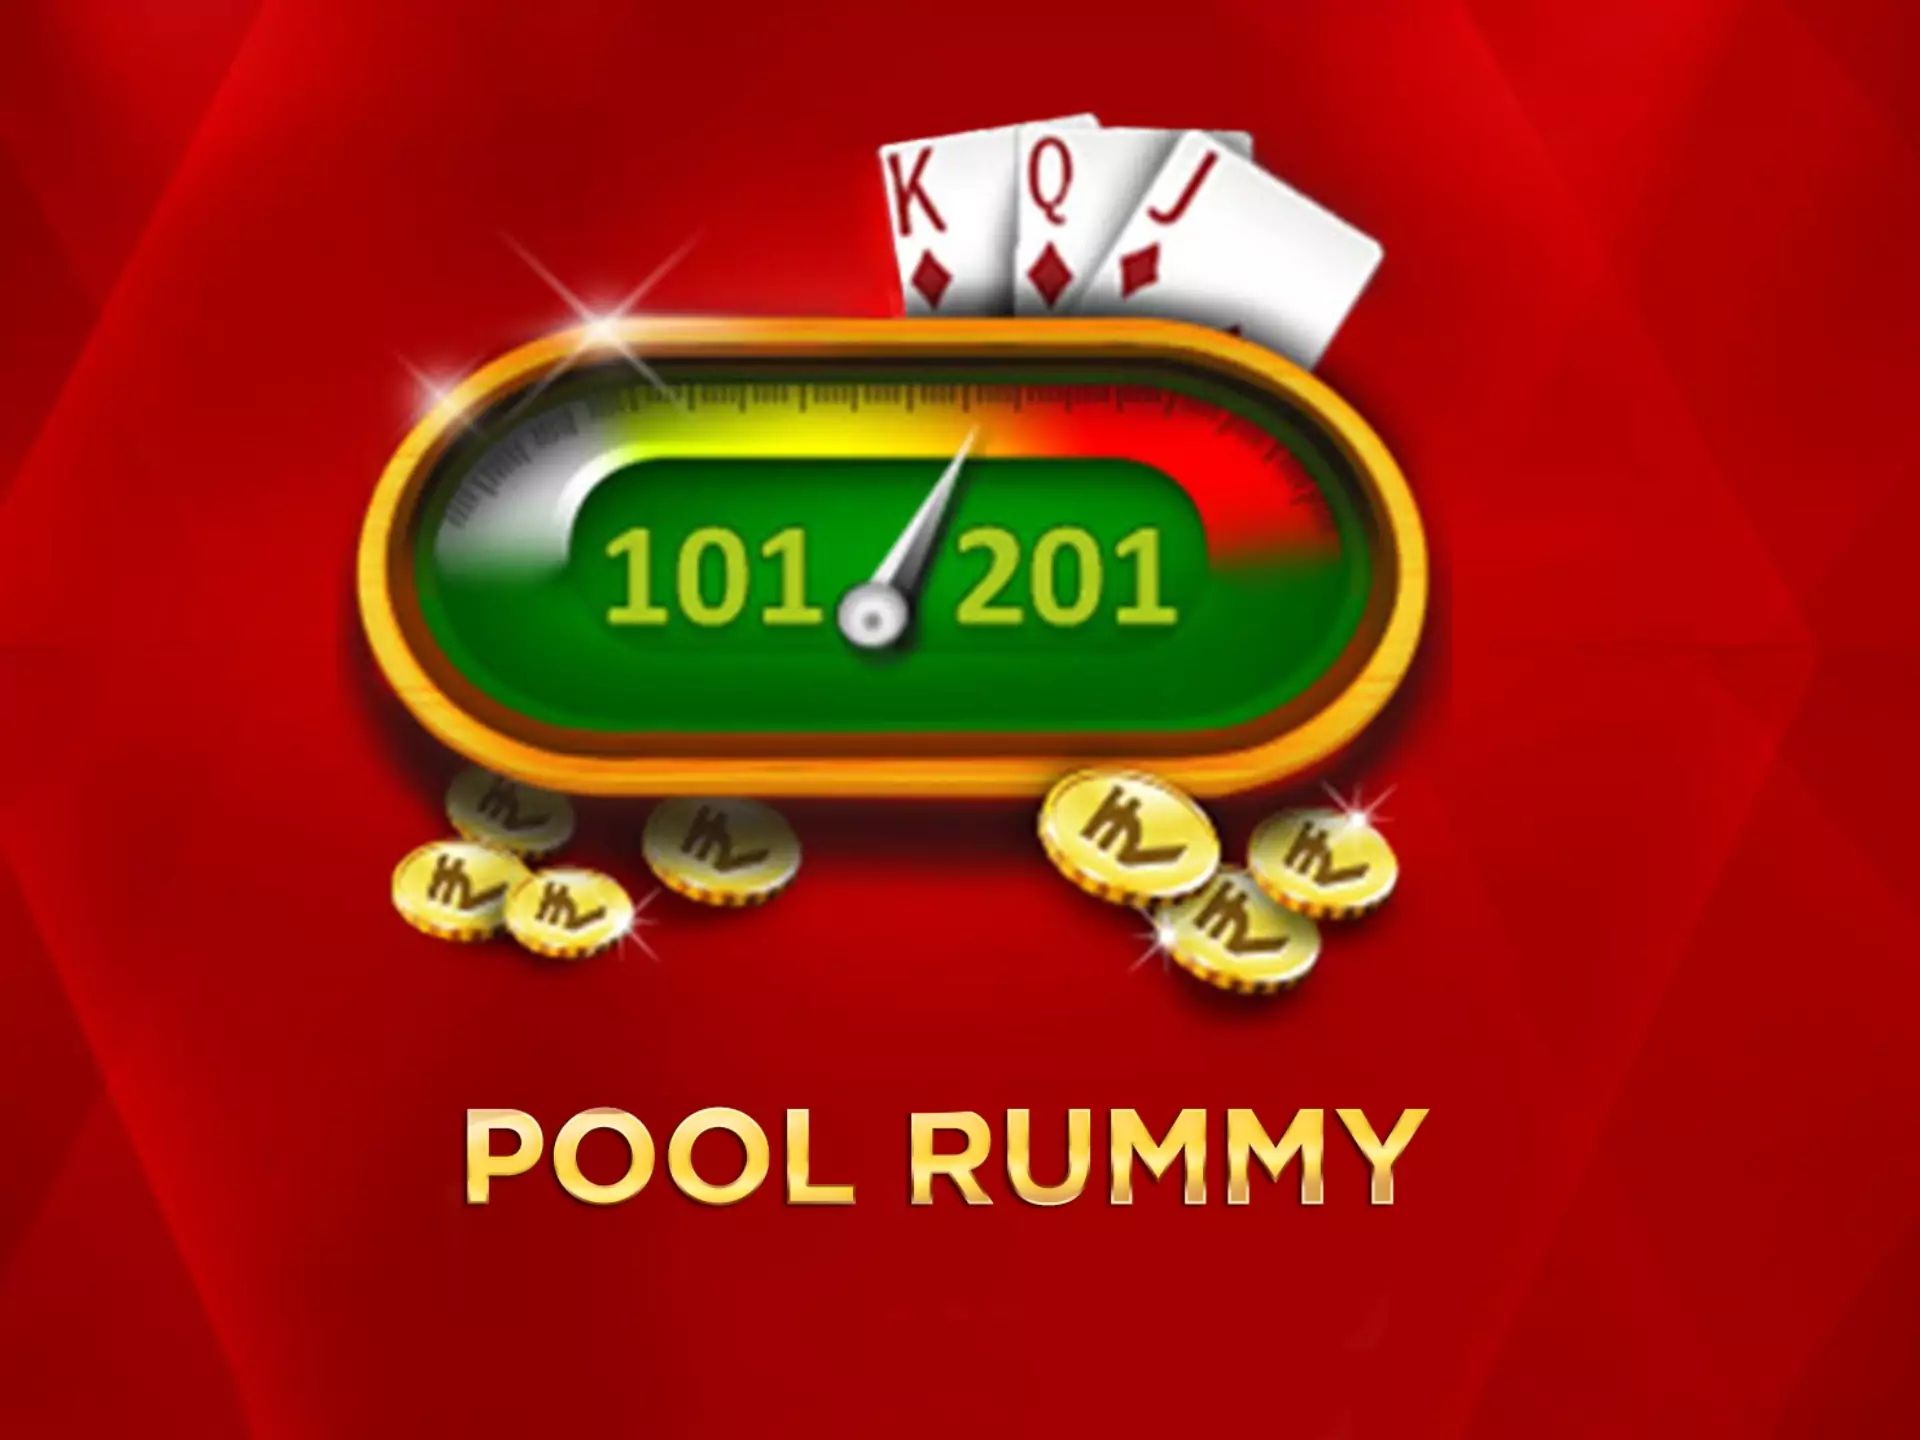 Play Pool Rummy and make a profit from online casino.